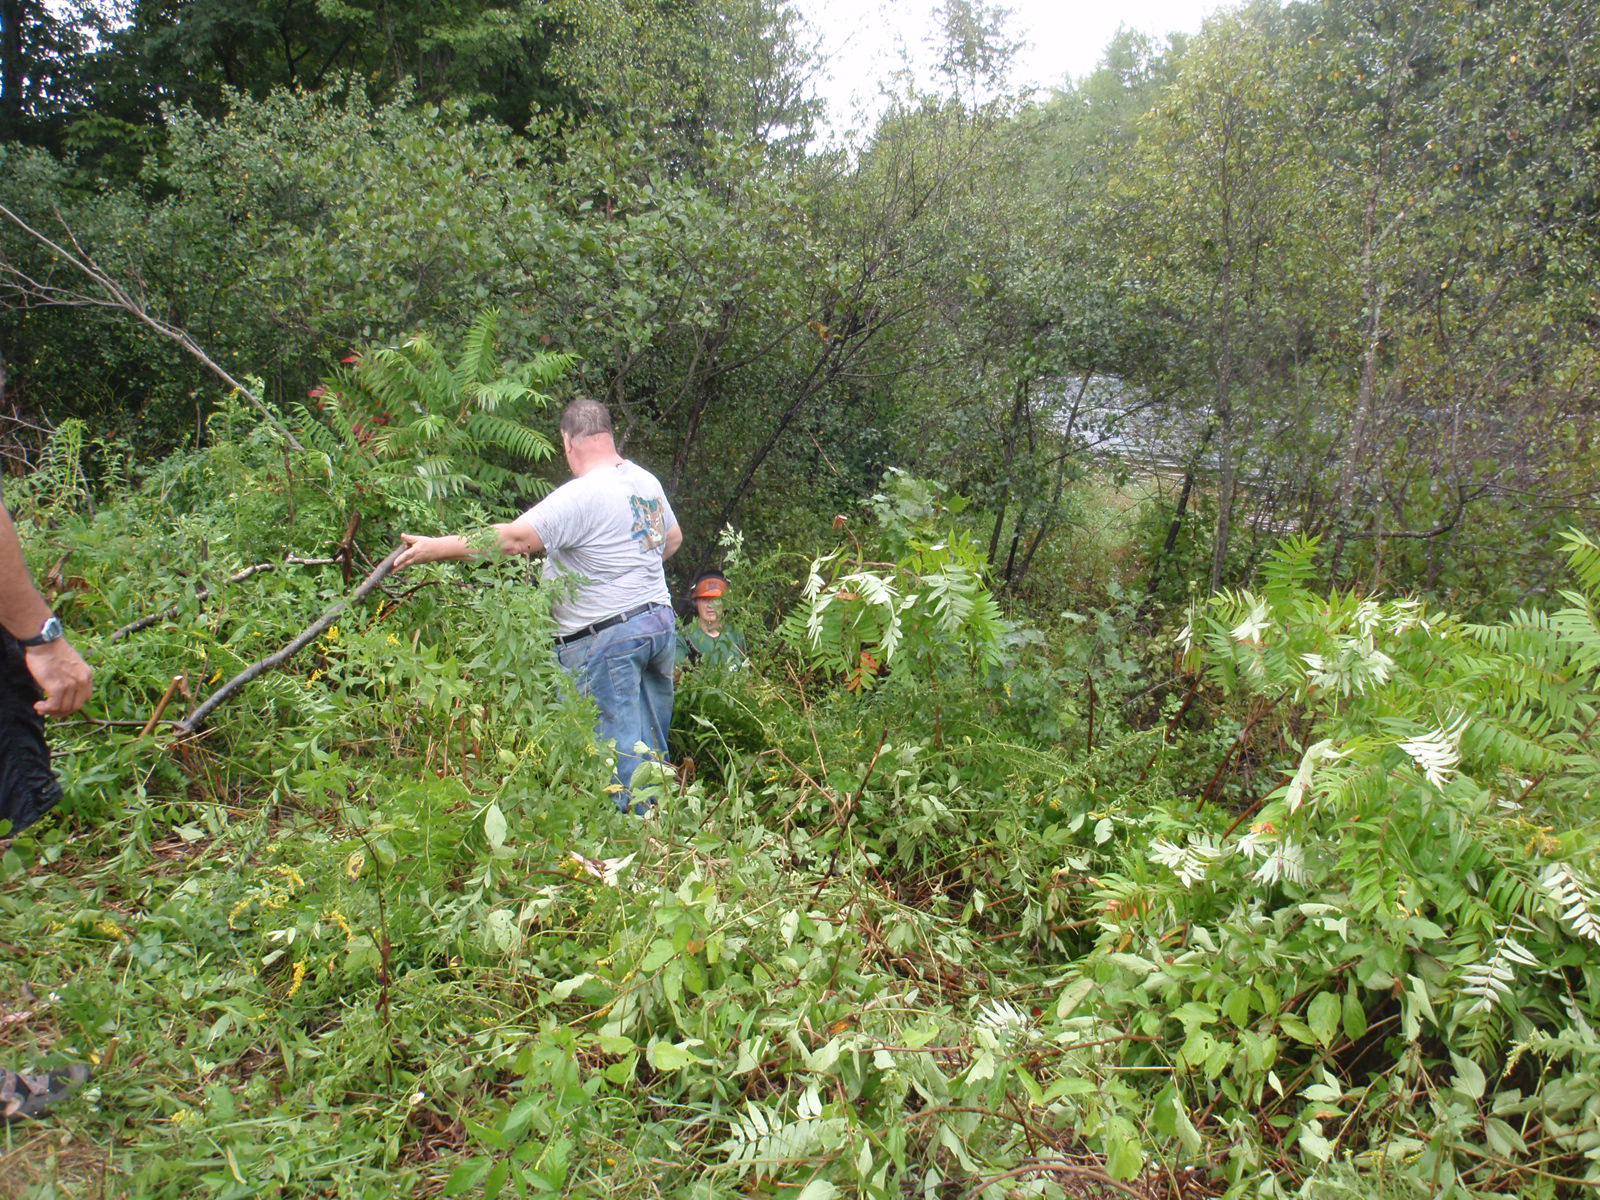 Clearing invasives to allow a view of the river